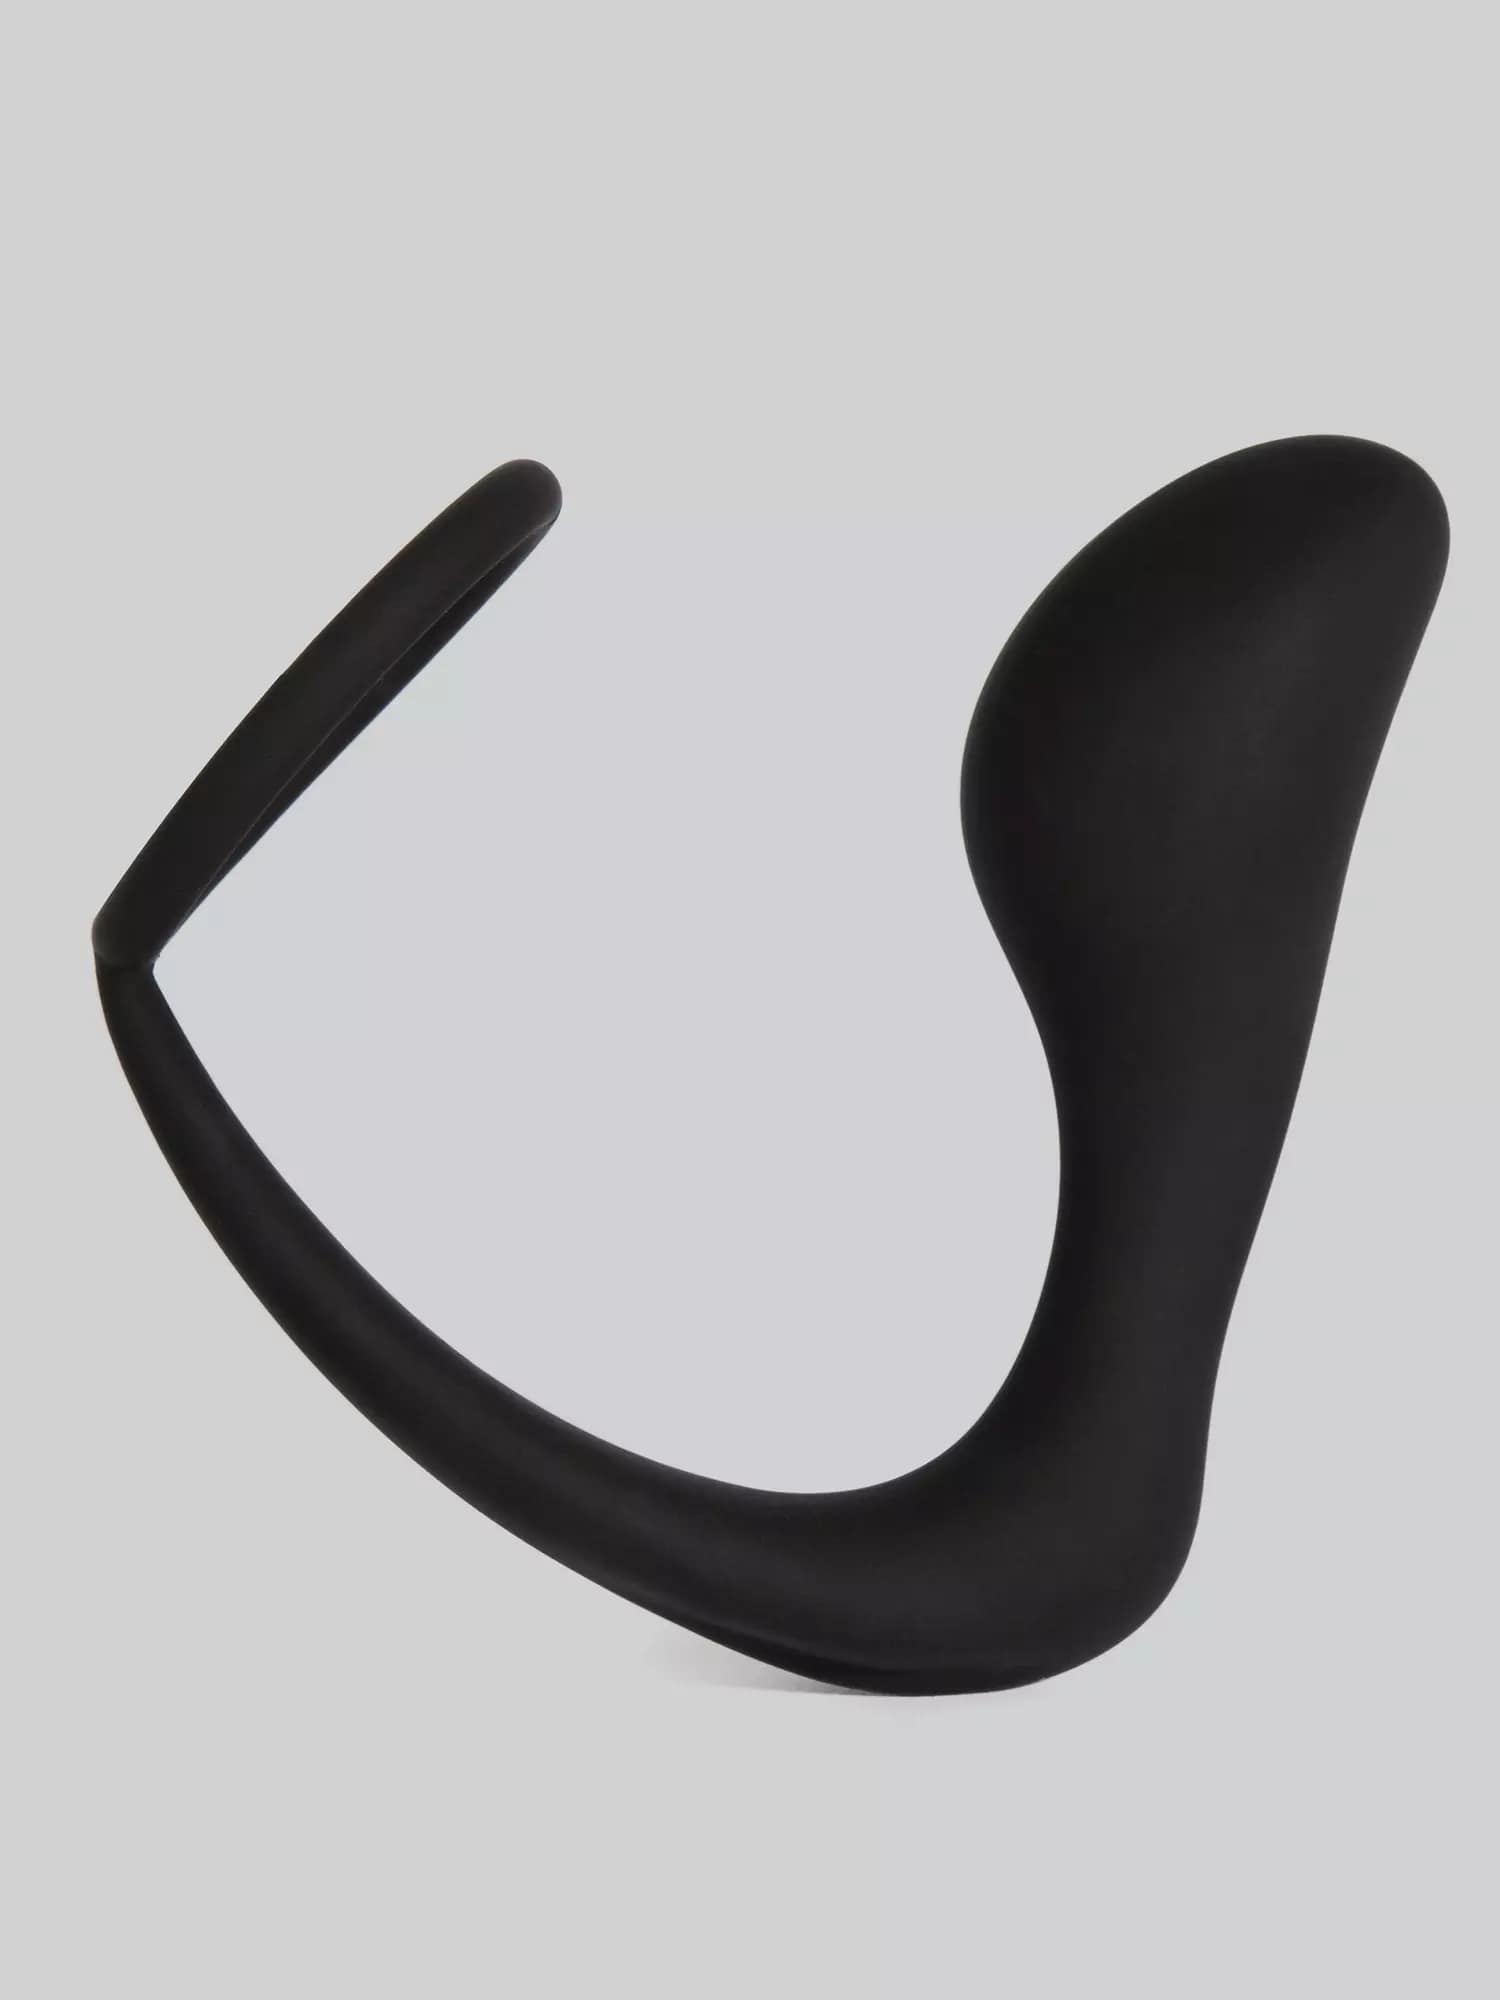 Lynk Plugged Cock Ring Prostate Massager. Slide 14